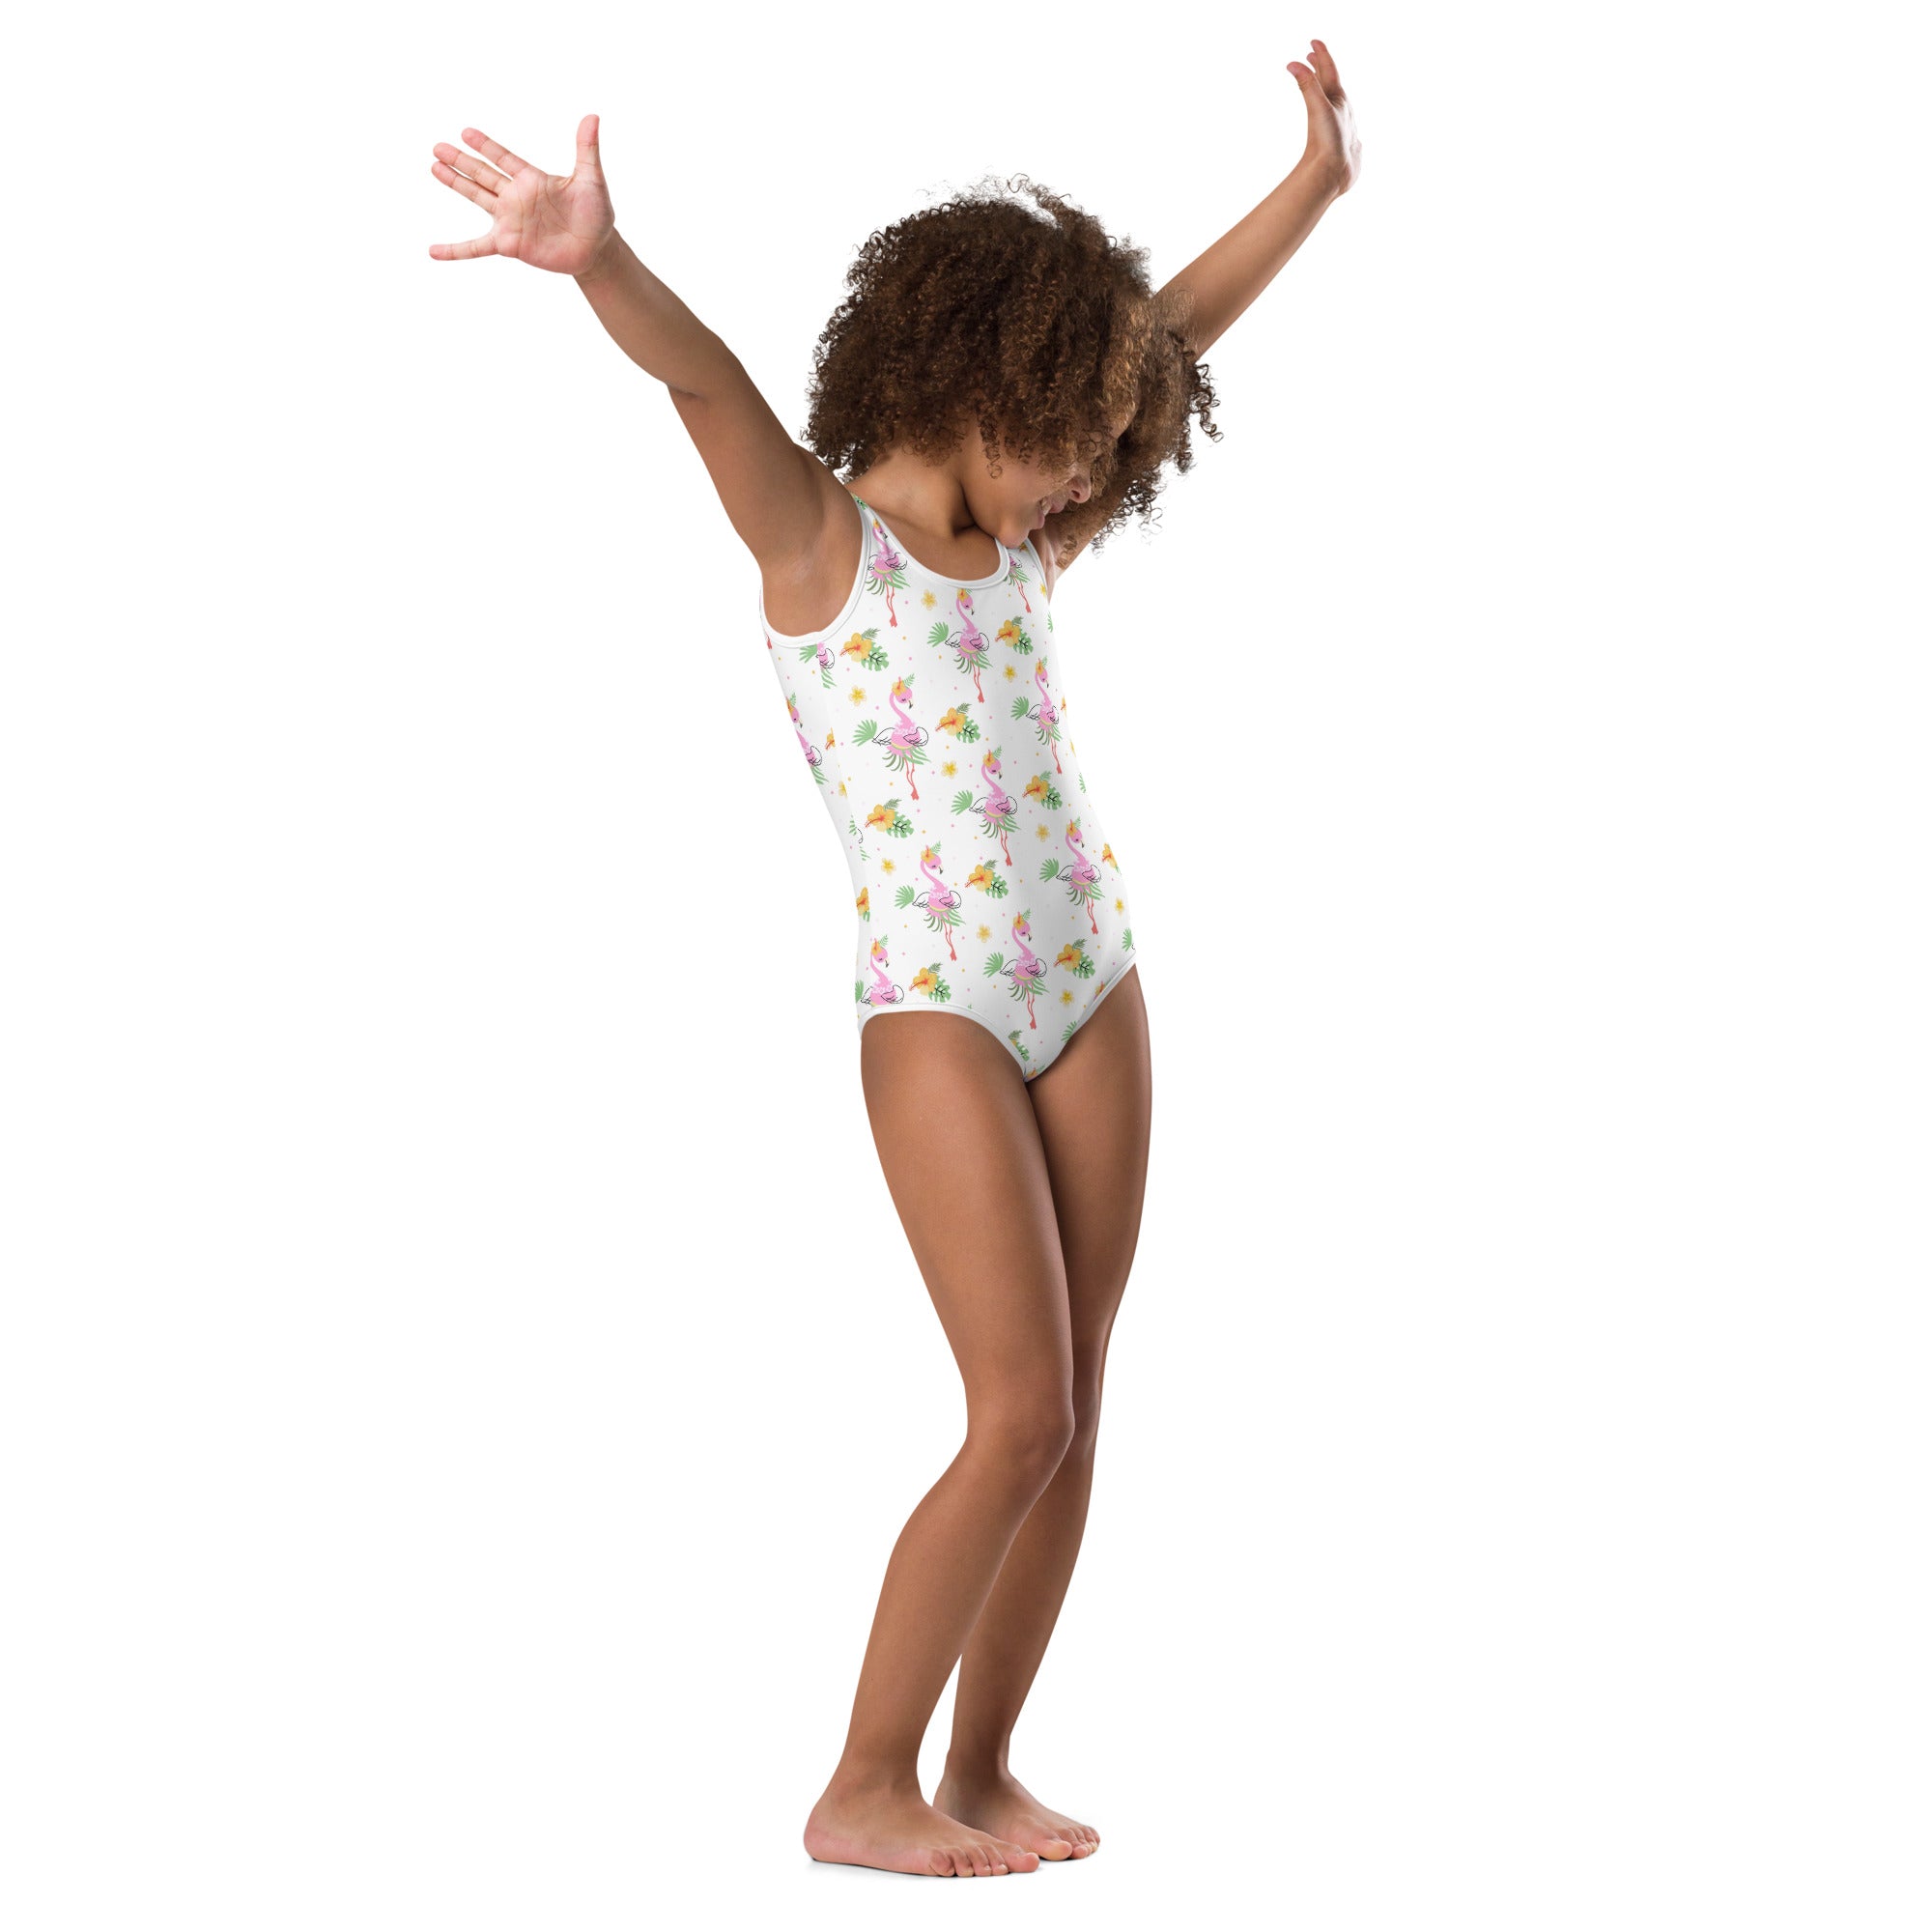 Kids' Printed One-Piece Swimsuit - Dancing Flamingoes